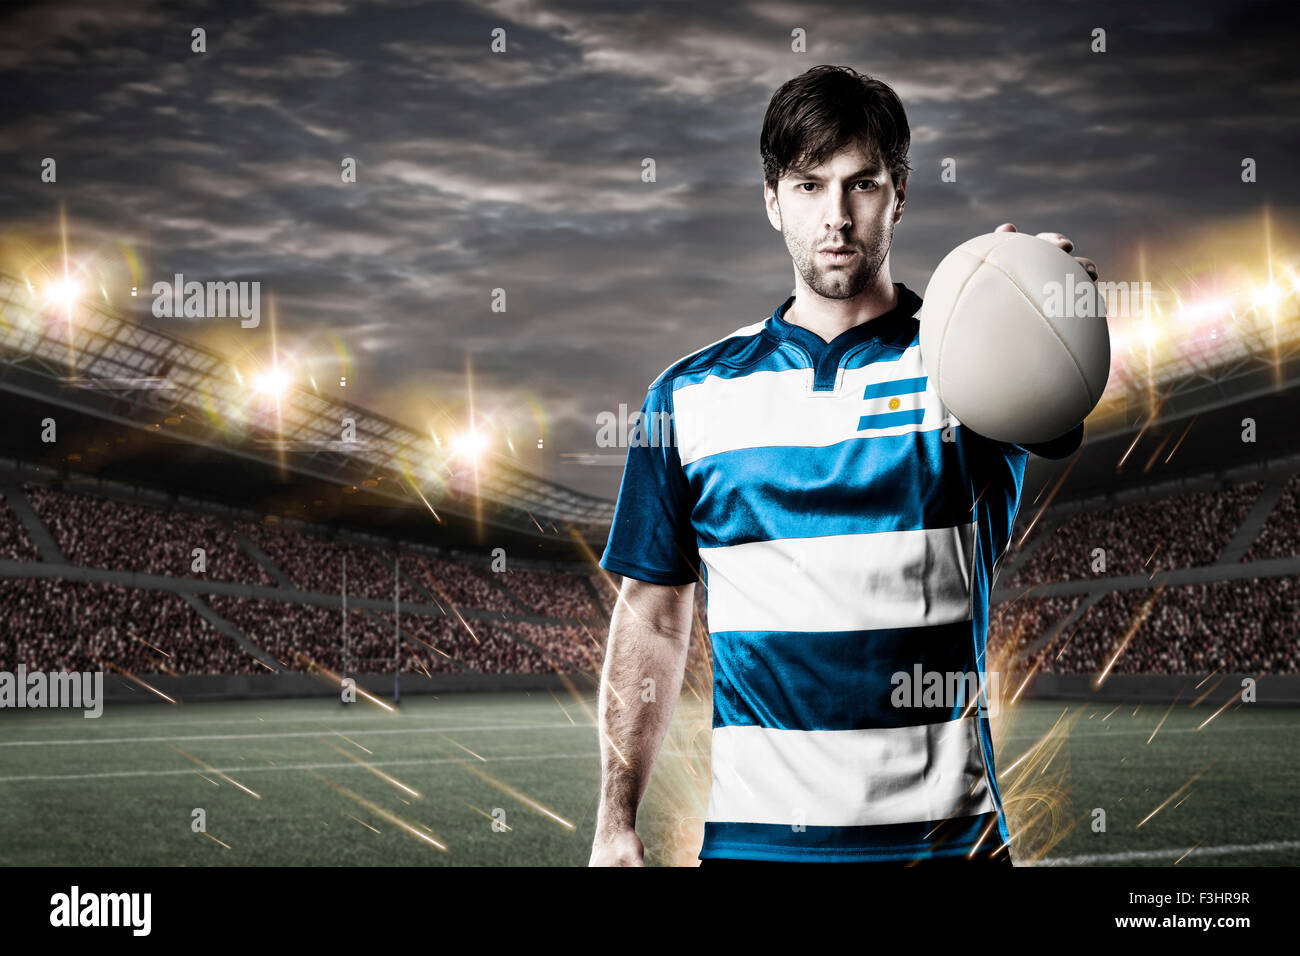 Argentinean rugby player, wearing a blue and white uniform in a stadium. Stock Photo